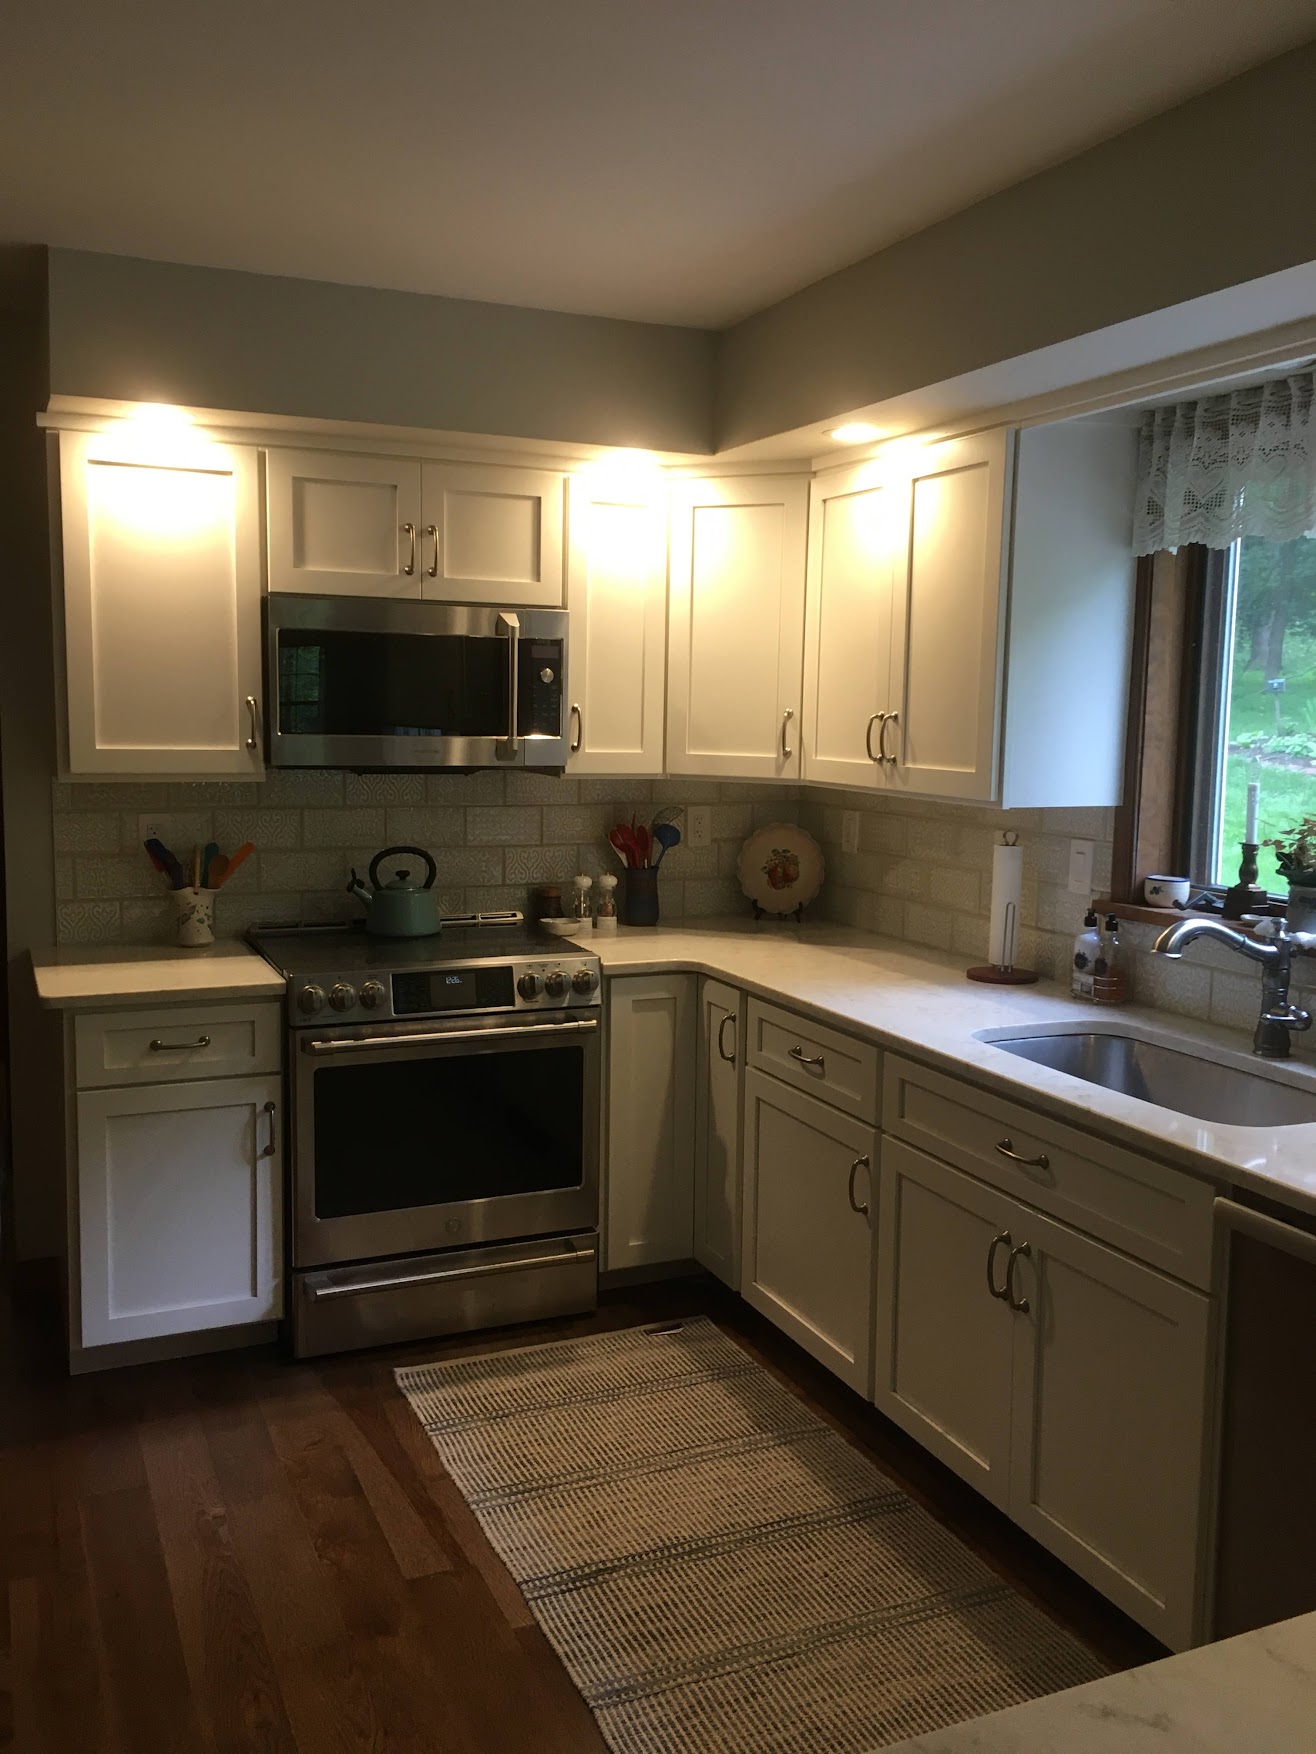 Custom Kitchen Cabinet Refacing with White Flat Panel Doors and Custom Cabinetry Storage